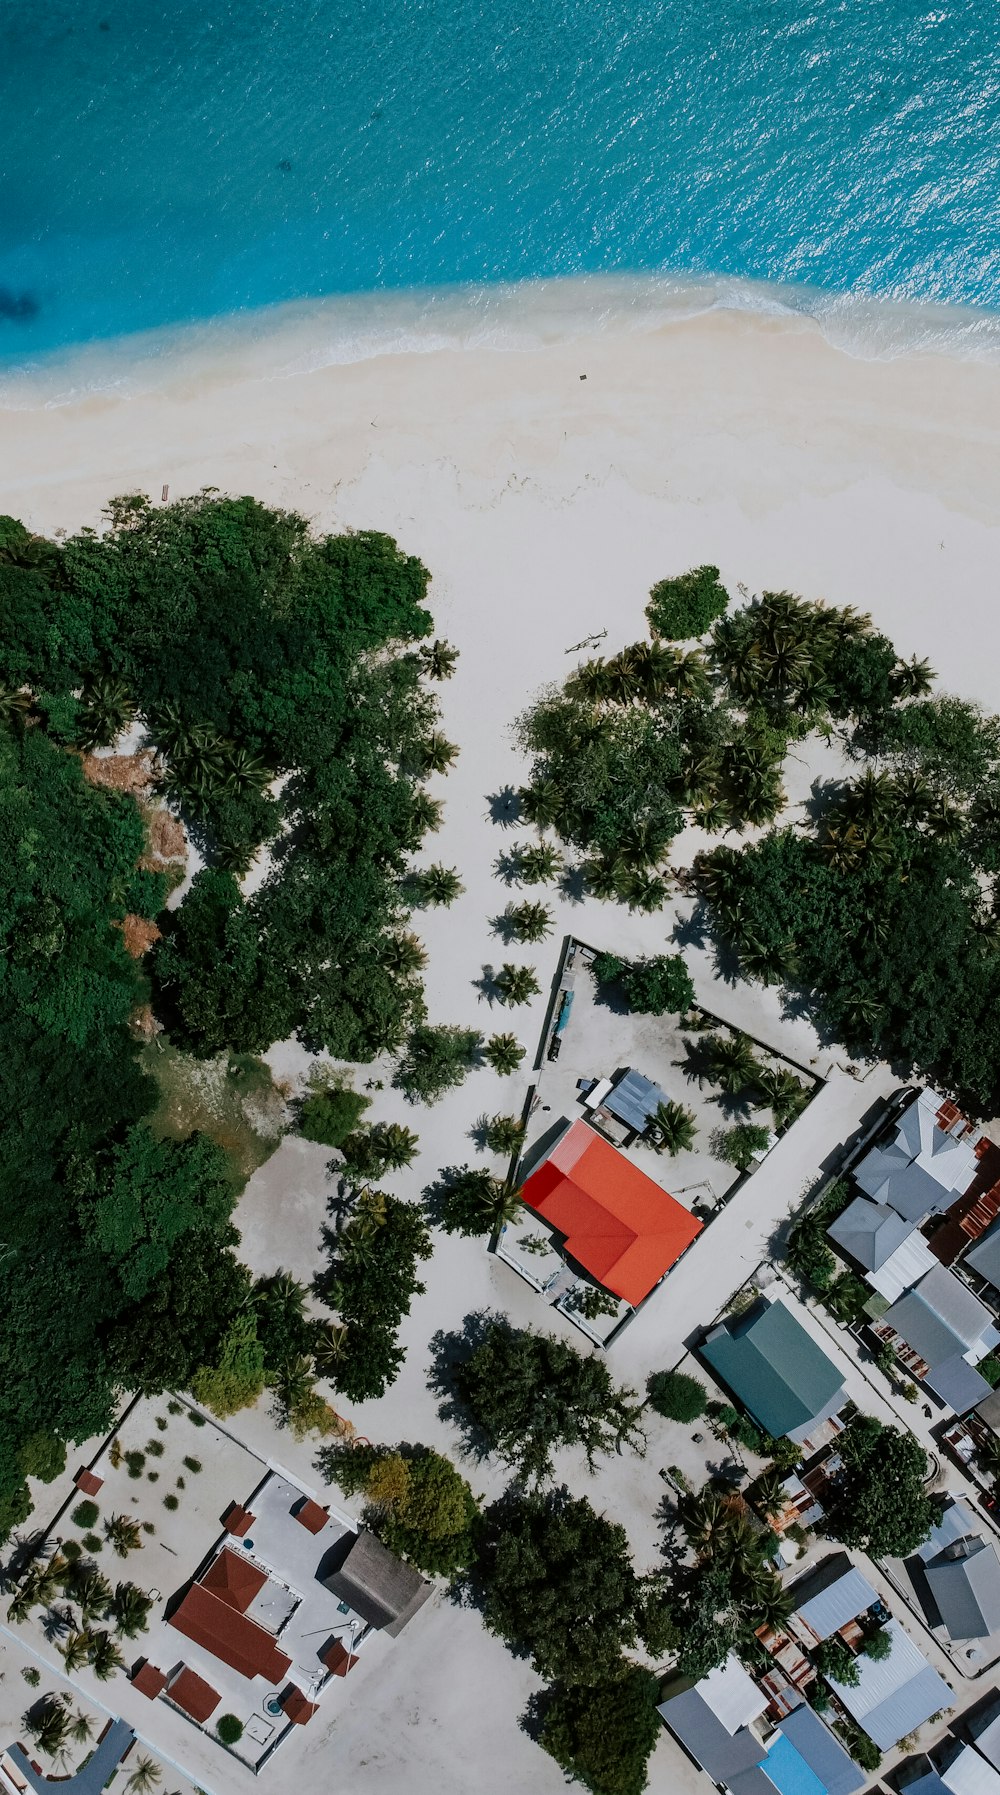 an aerial view of a beach with houses and trees